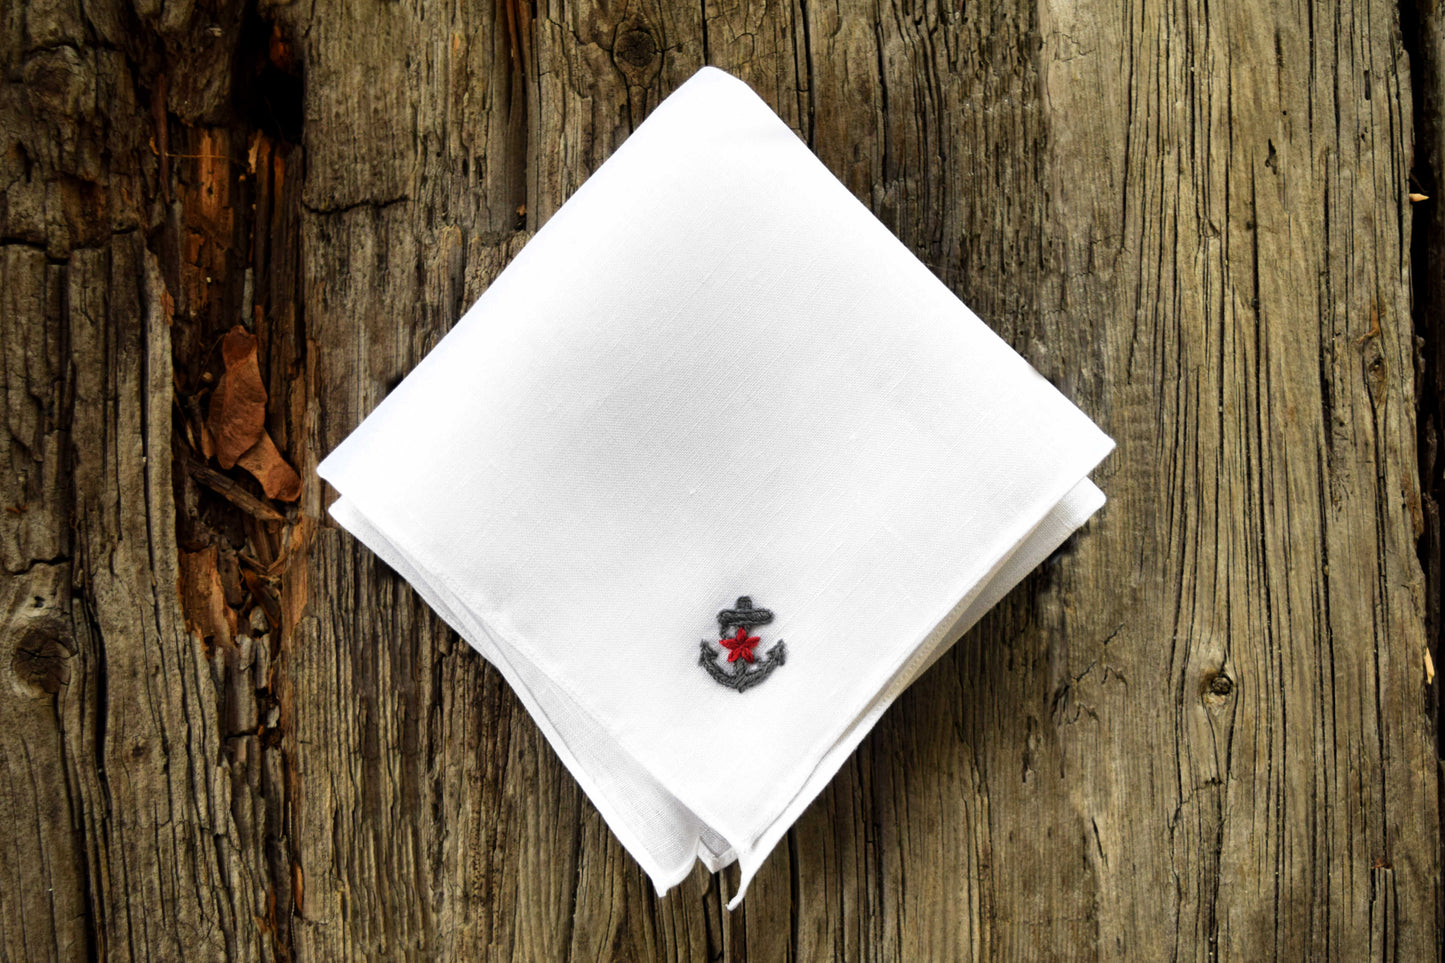 Anchors Aweigh Nautical Linen Pocket Square